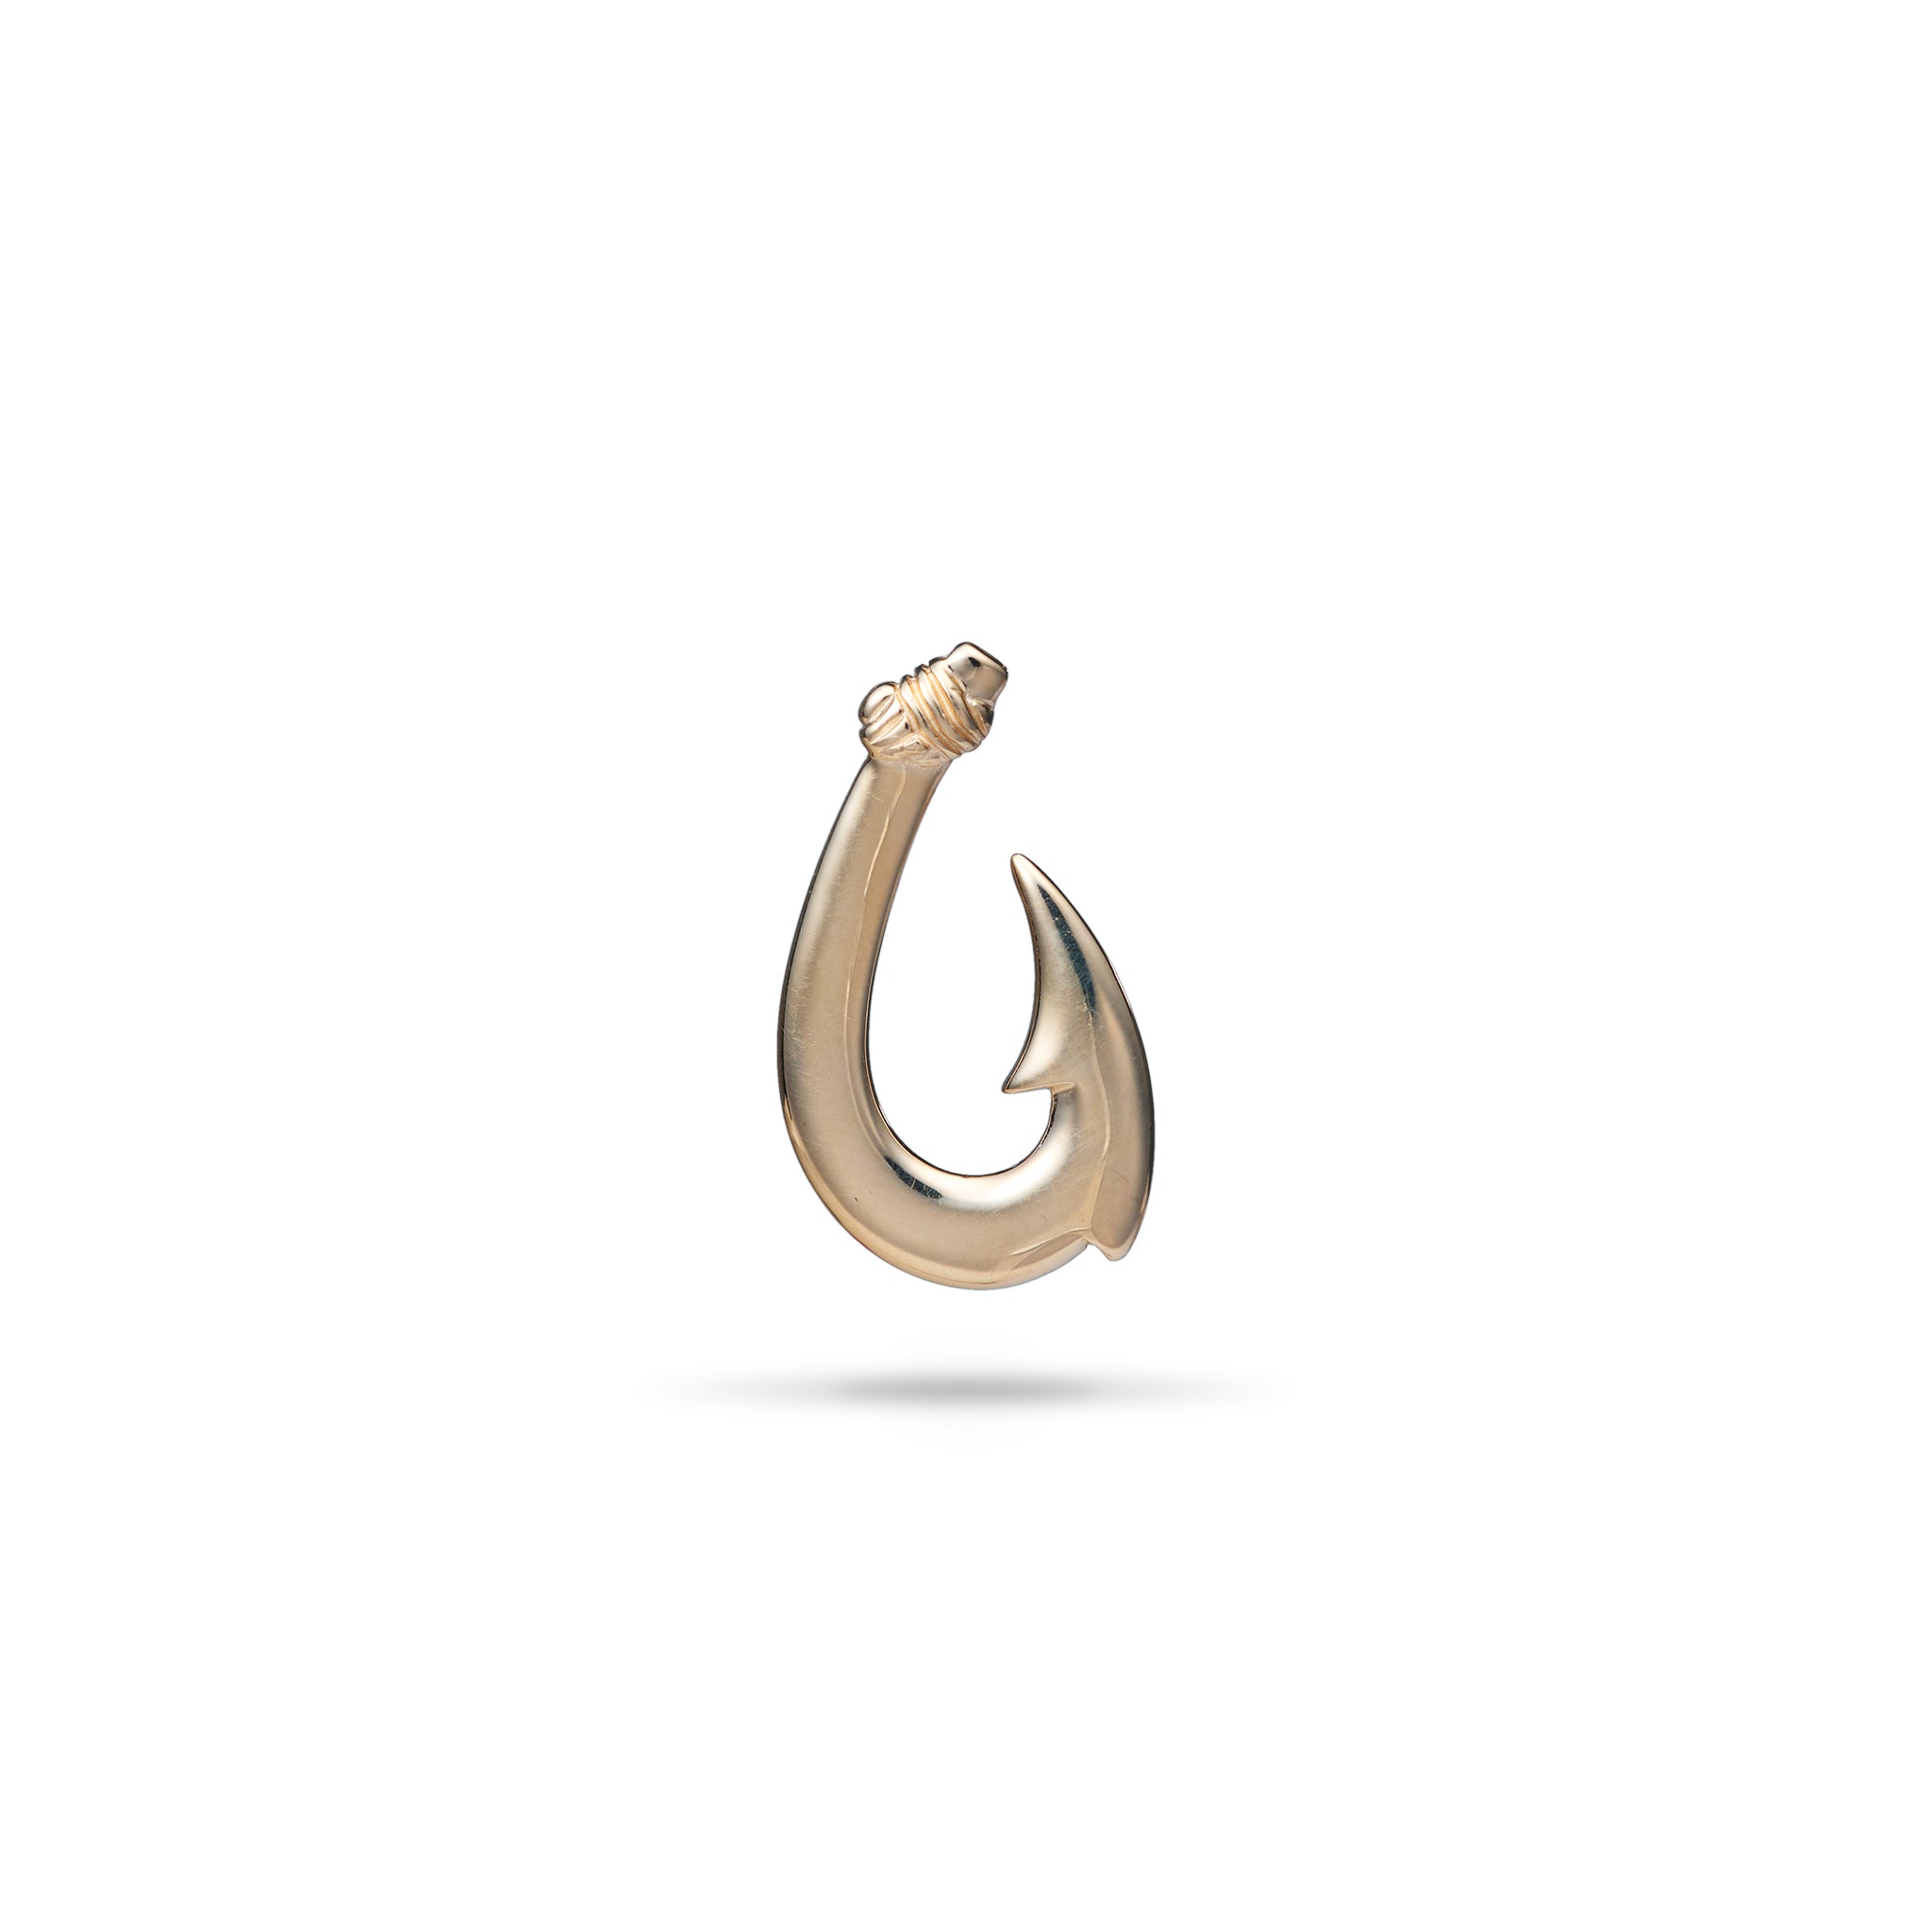 Fish Hook Pendant in Gold - 24mm